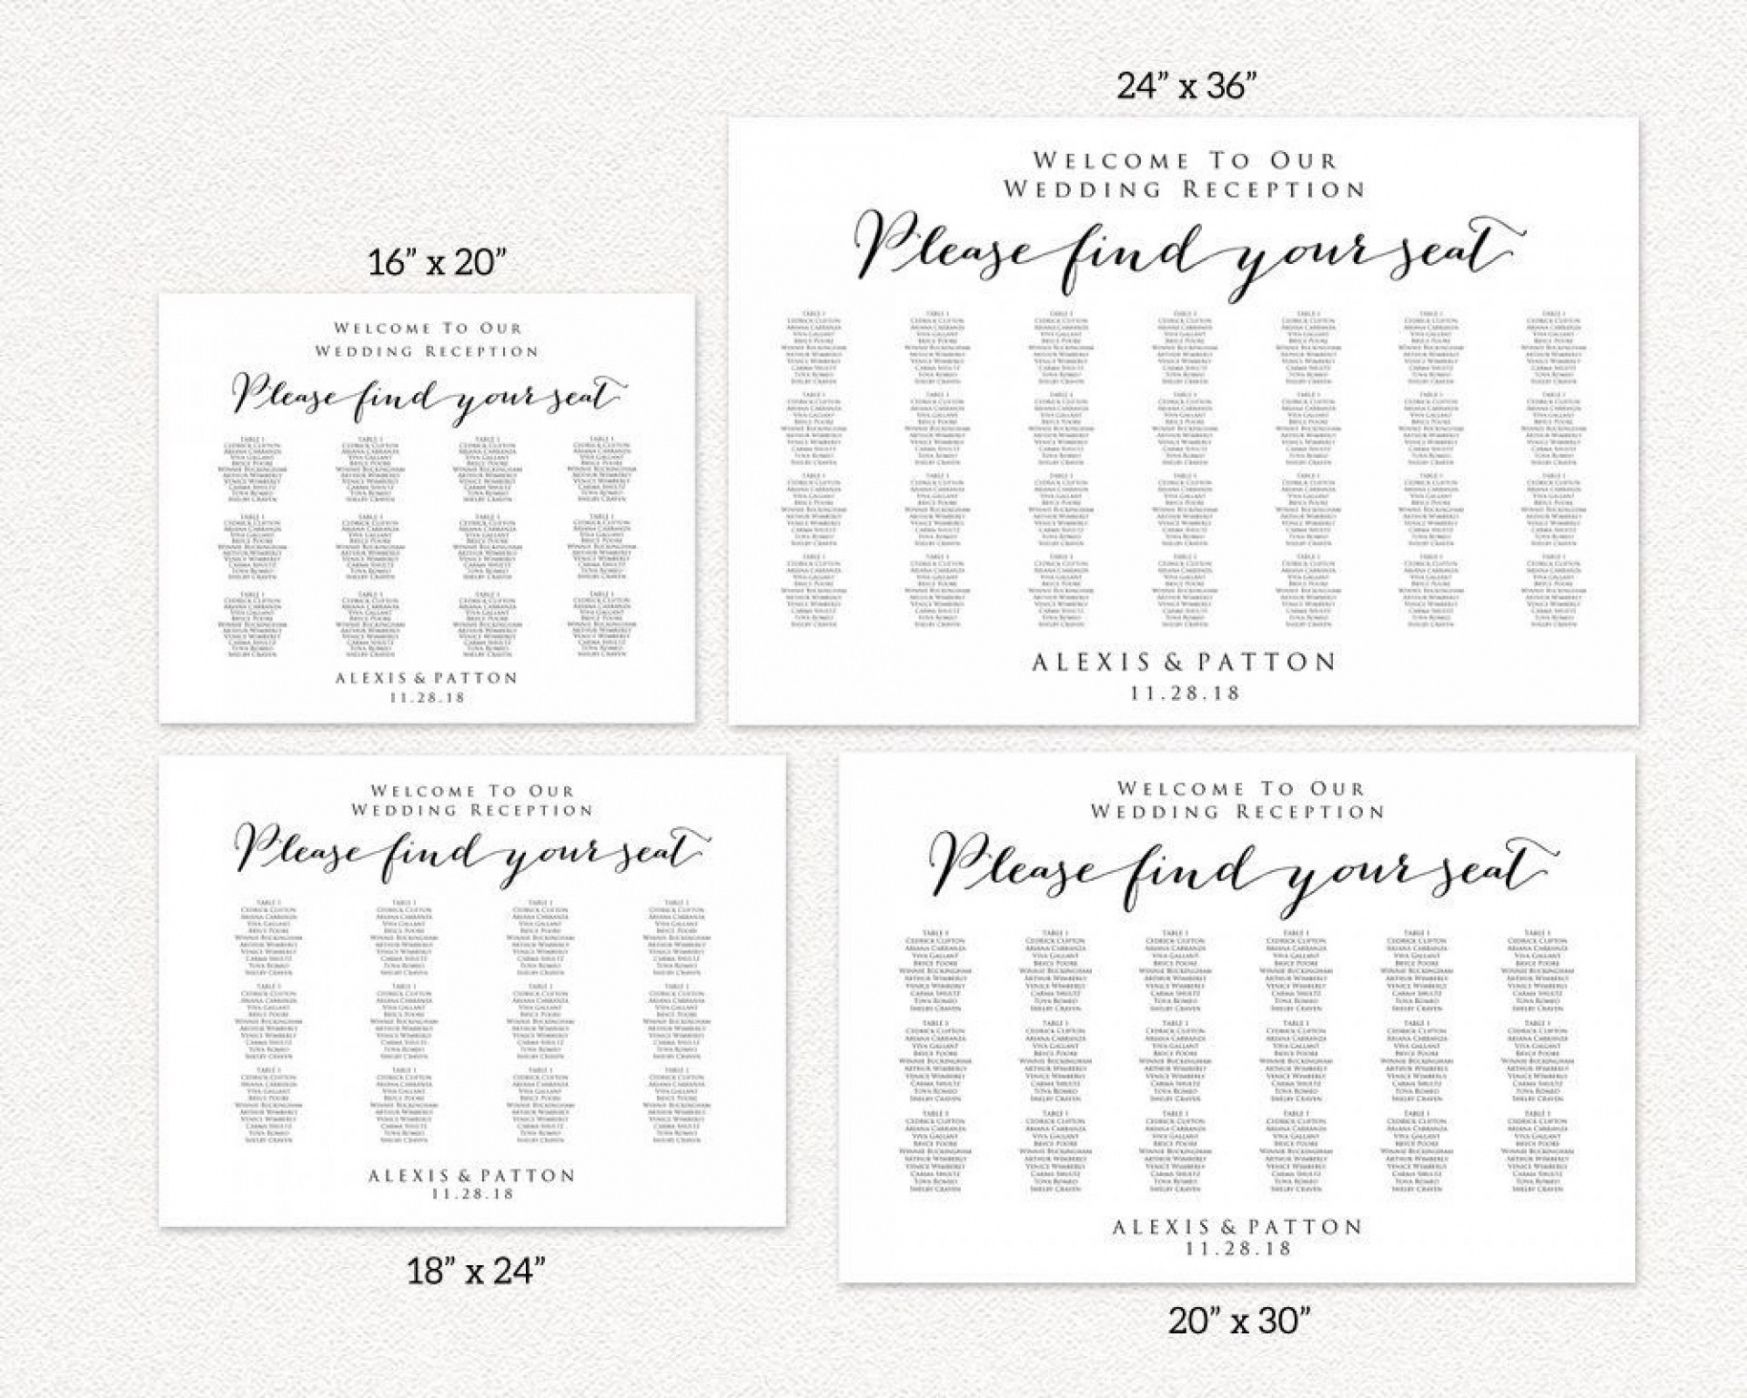 wedding seating chart poster template ~ addictionary wedding reception seating chart poster template doc